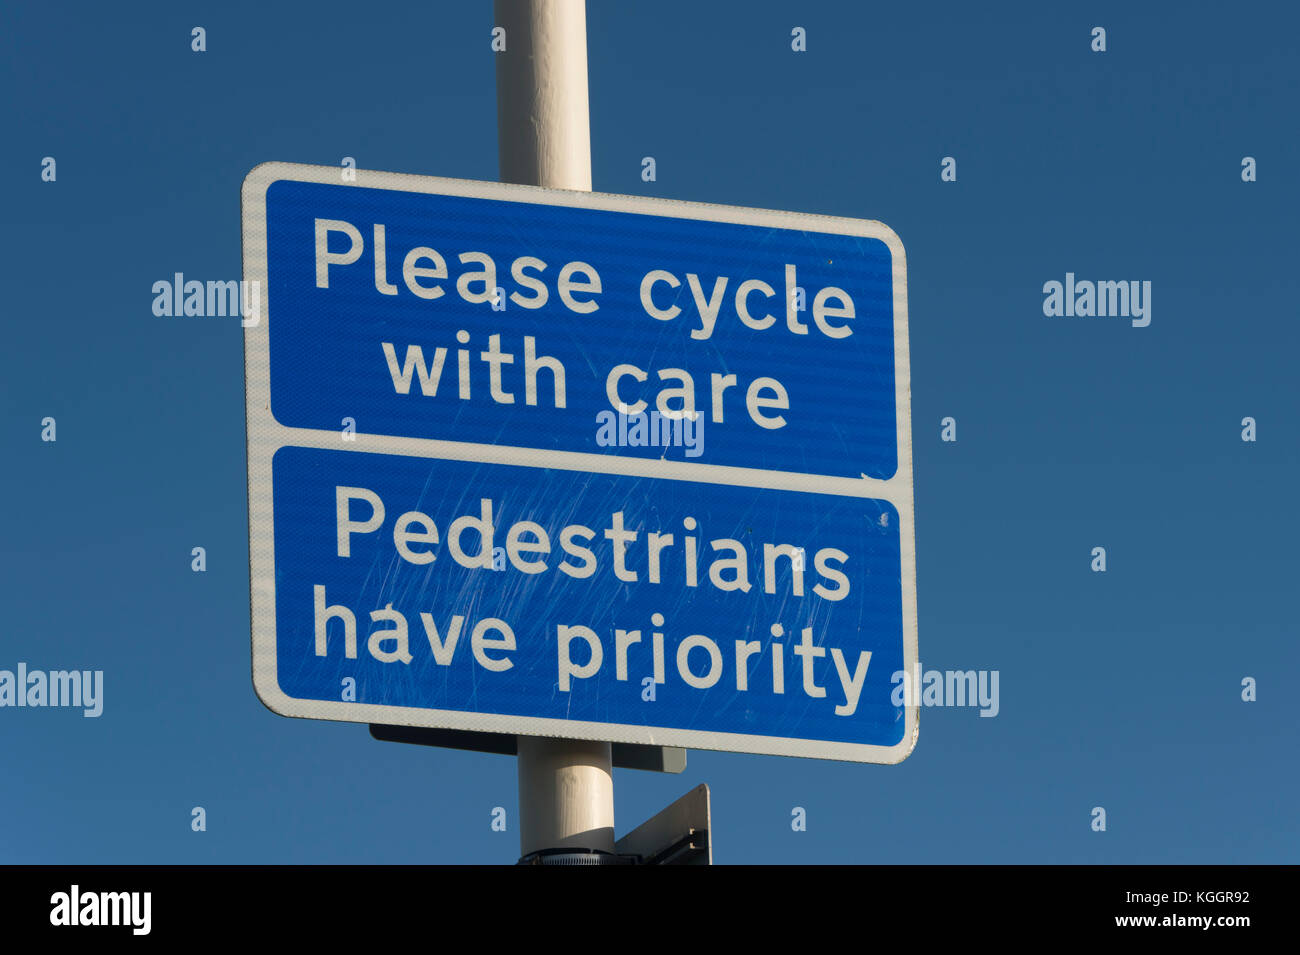 blue road sign, 'Please cycle with care', 'Pedestrians have priority' . Stock Photo